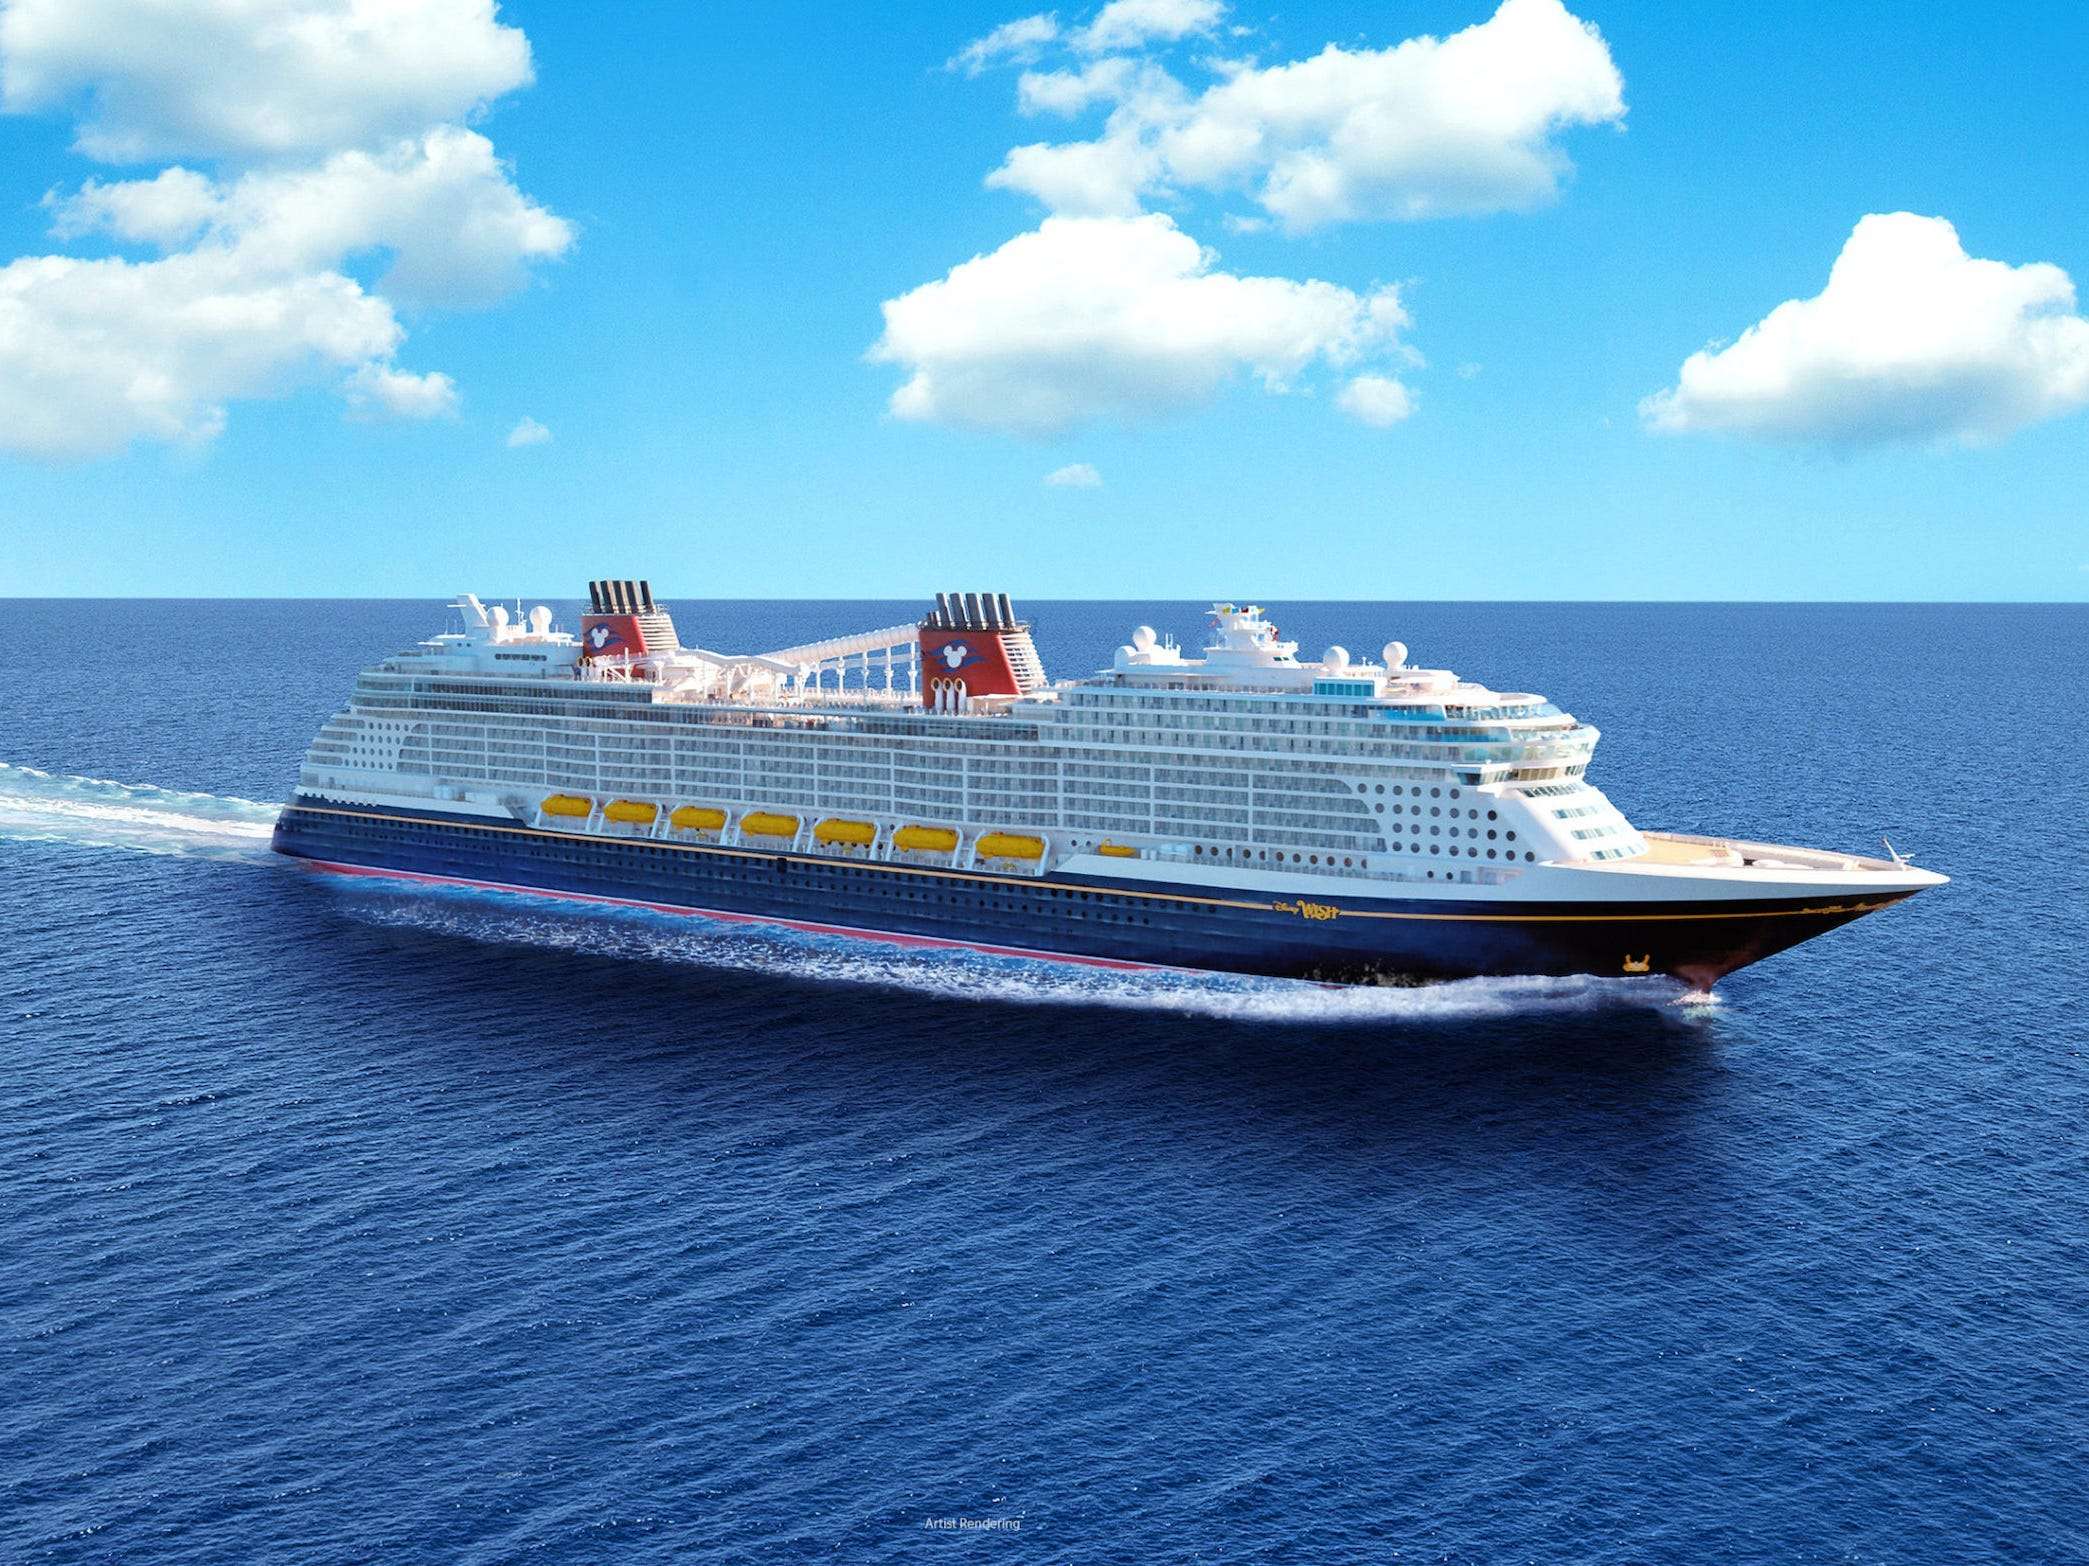 Disney has unveiled its newest cruise ship with interactive 'Frozen